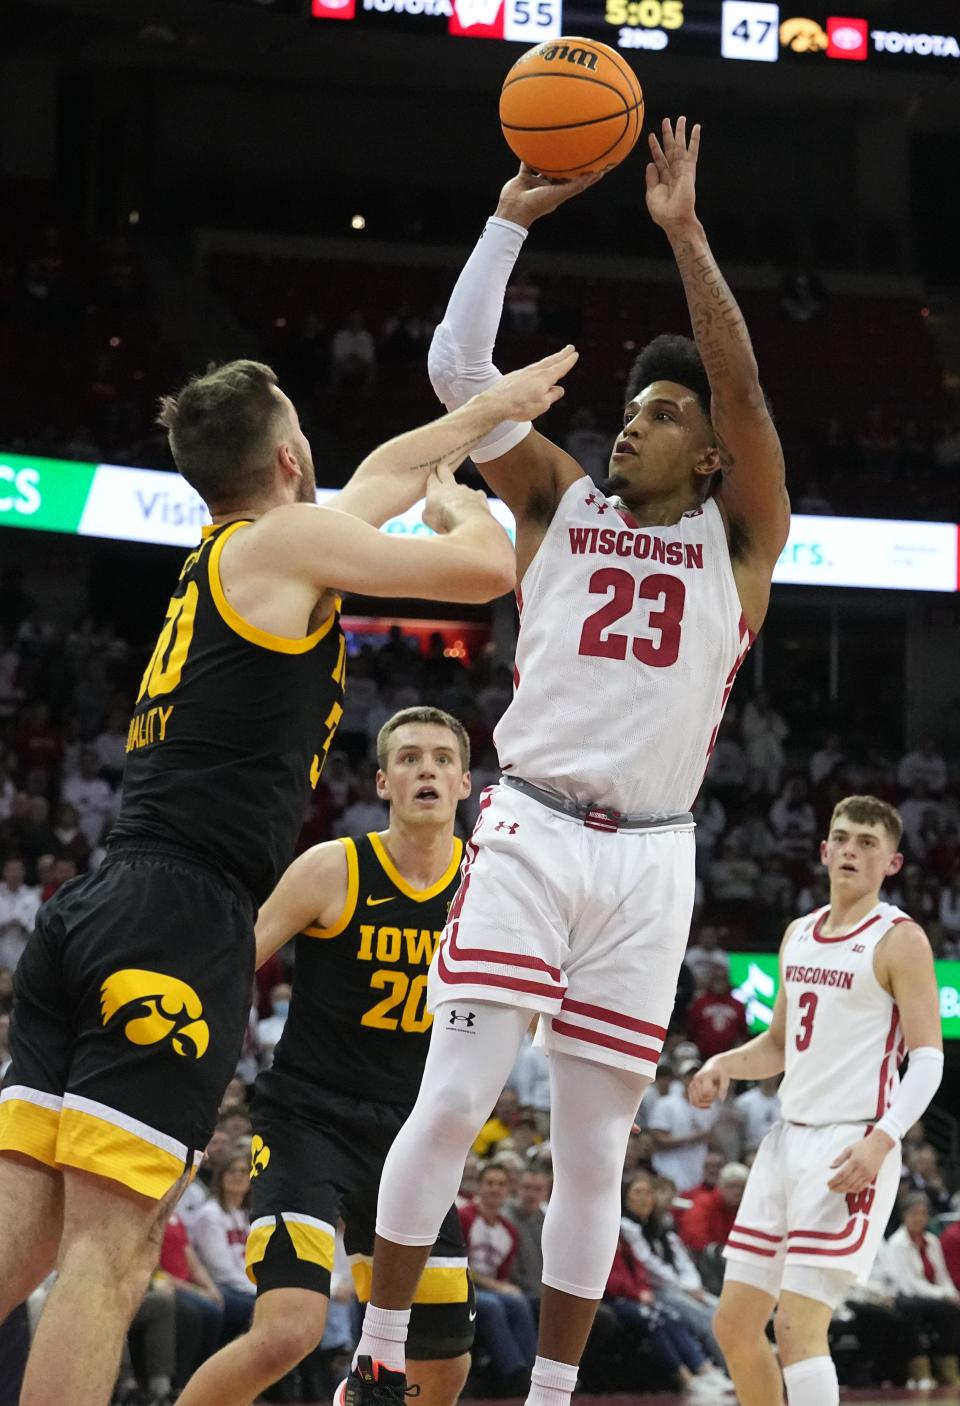 Chucky Hepburn and the Wisconsin Badgers play Bradley in a first-round game of the National Invitational Tournament Tuesday at the Kohl Center. Tipoff is set for 8:30 p.m.